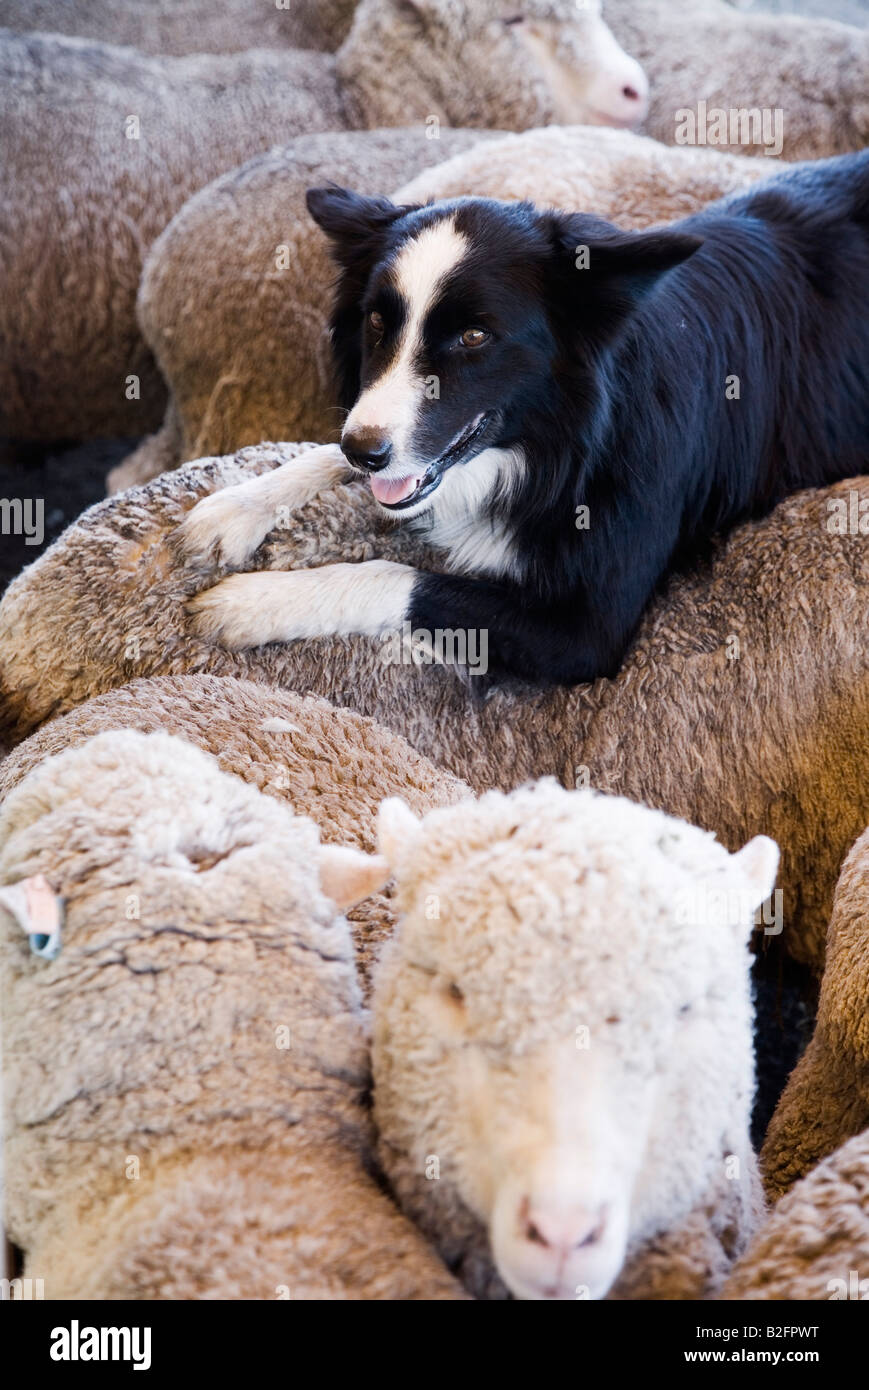 A sheep dog (Kelpie) sits on the back of sheep at a property near Brisbane, Queensland, AUSTRALIA Stock Photo